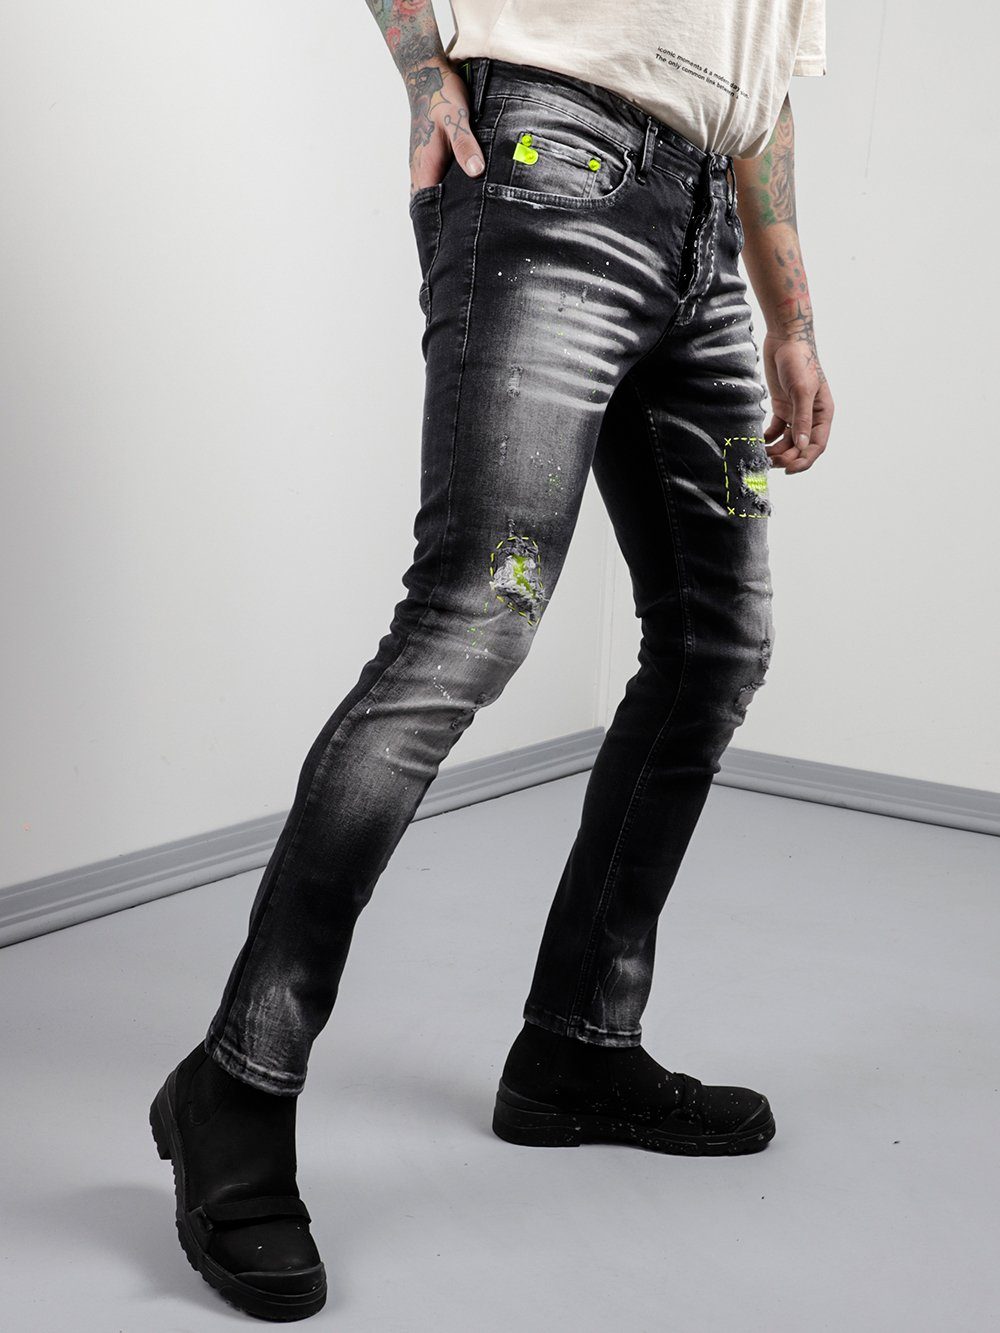 A man in NEON TALK jeans with a tattoo on his arm.